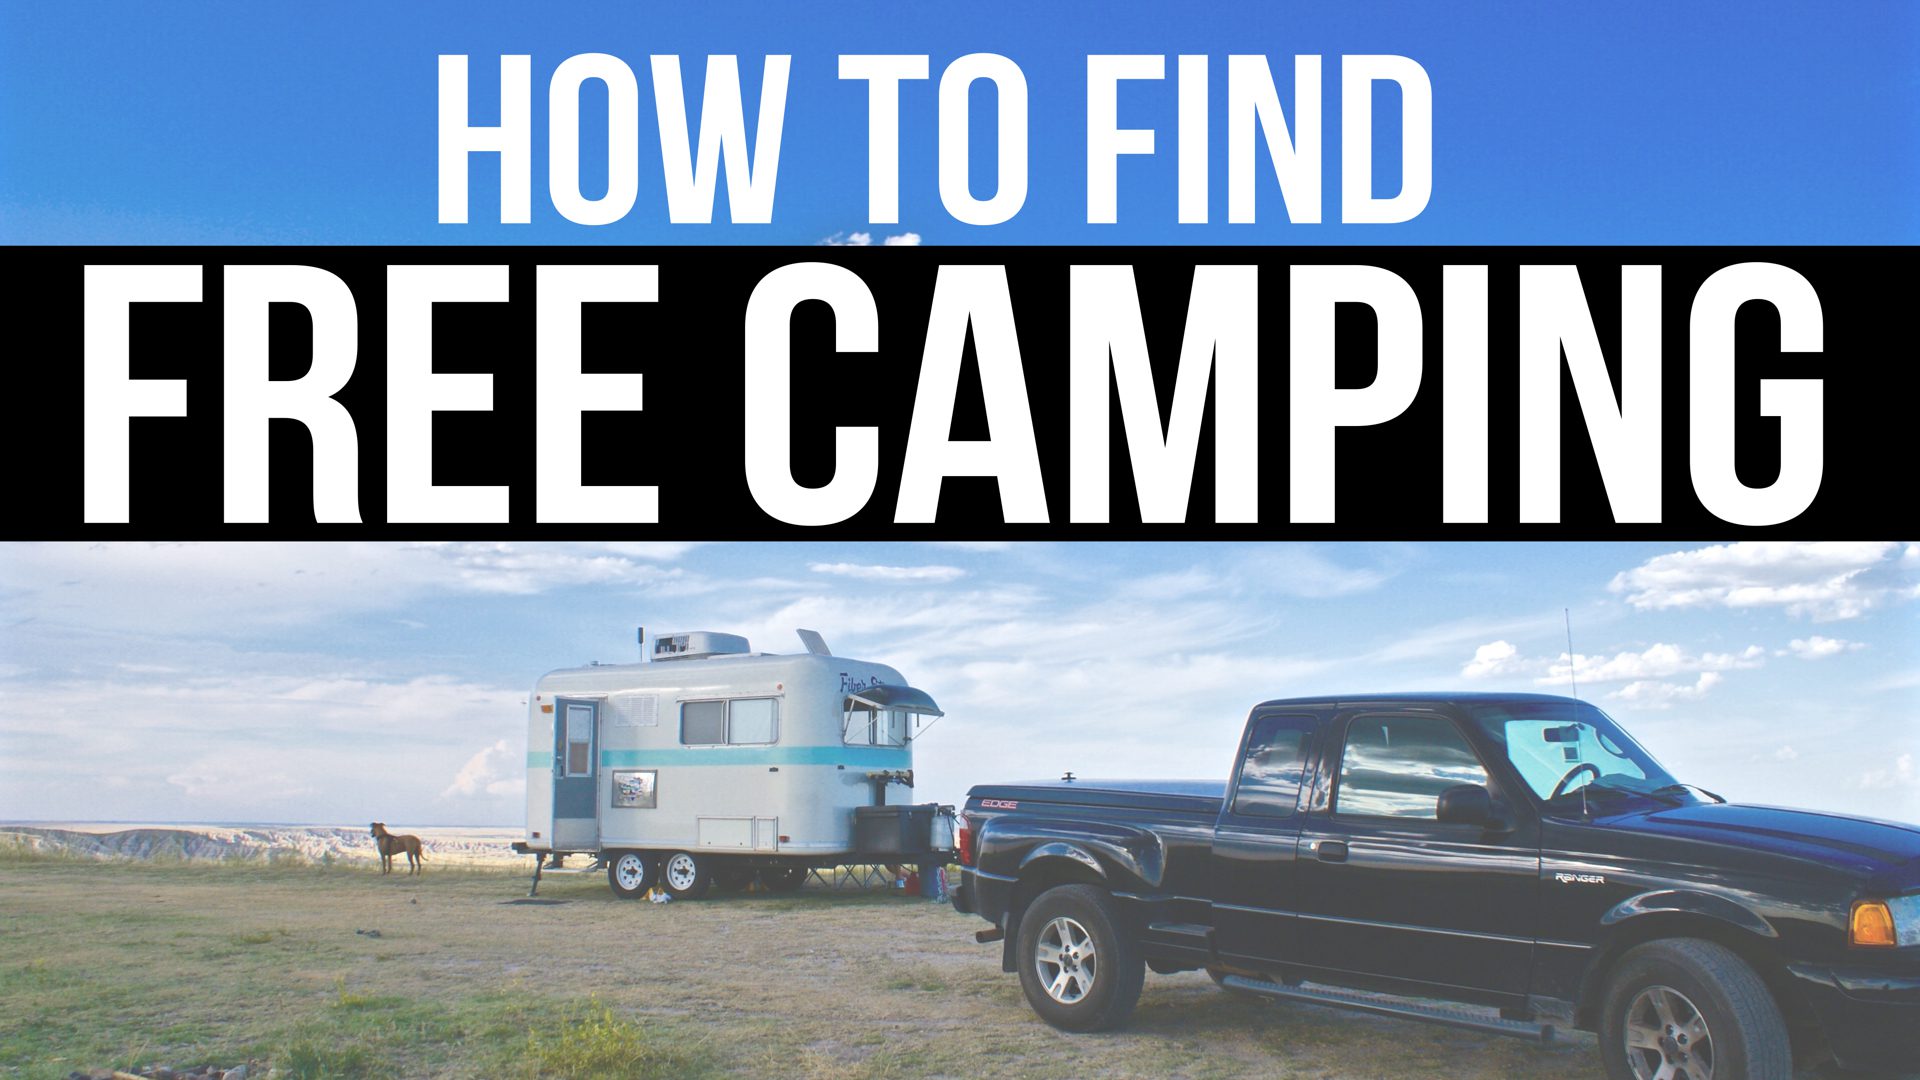 Q&A – How to Find Free Camping?